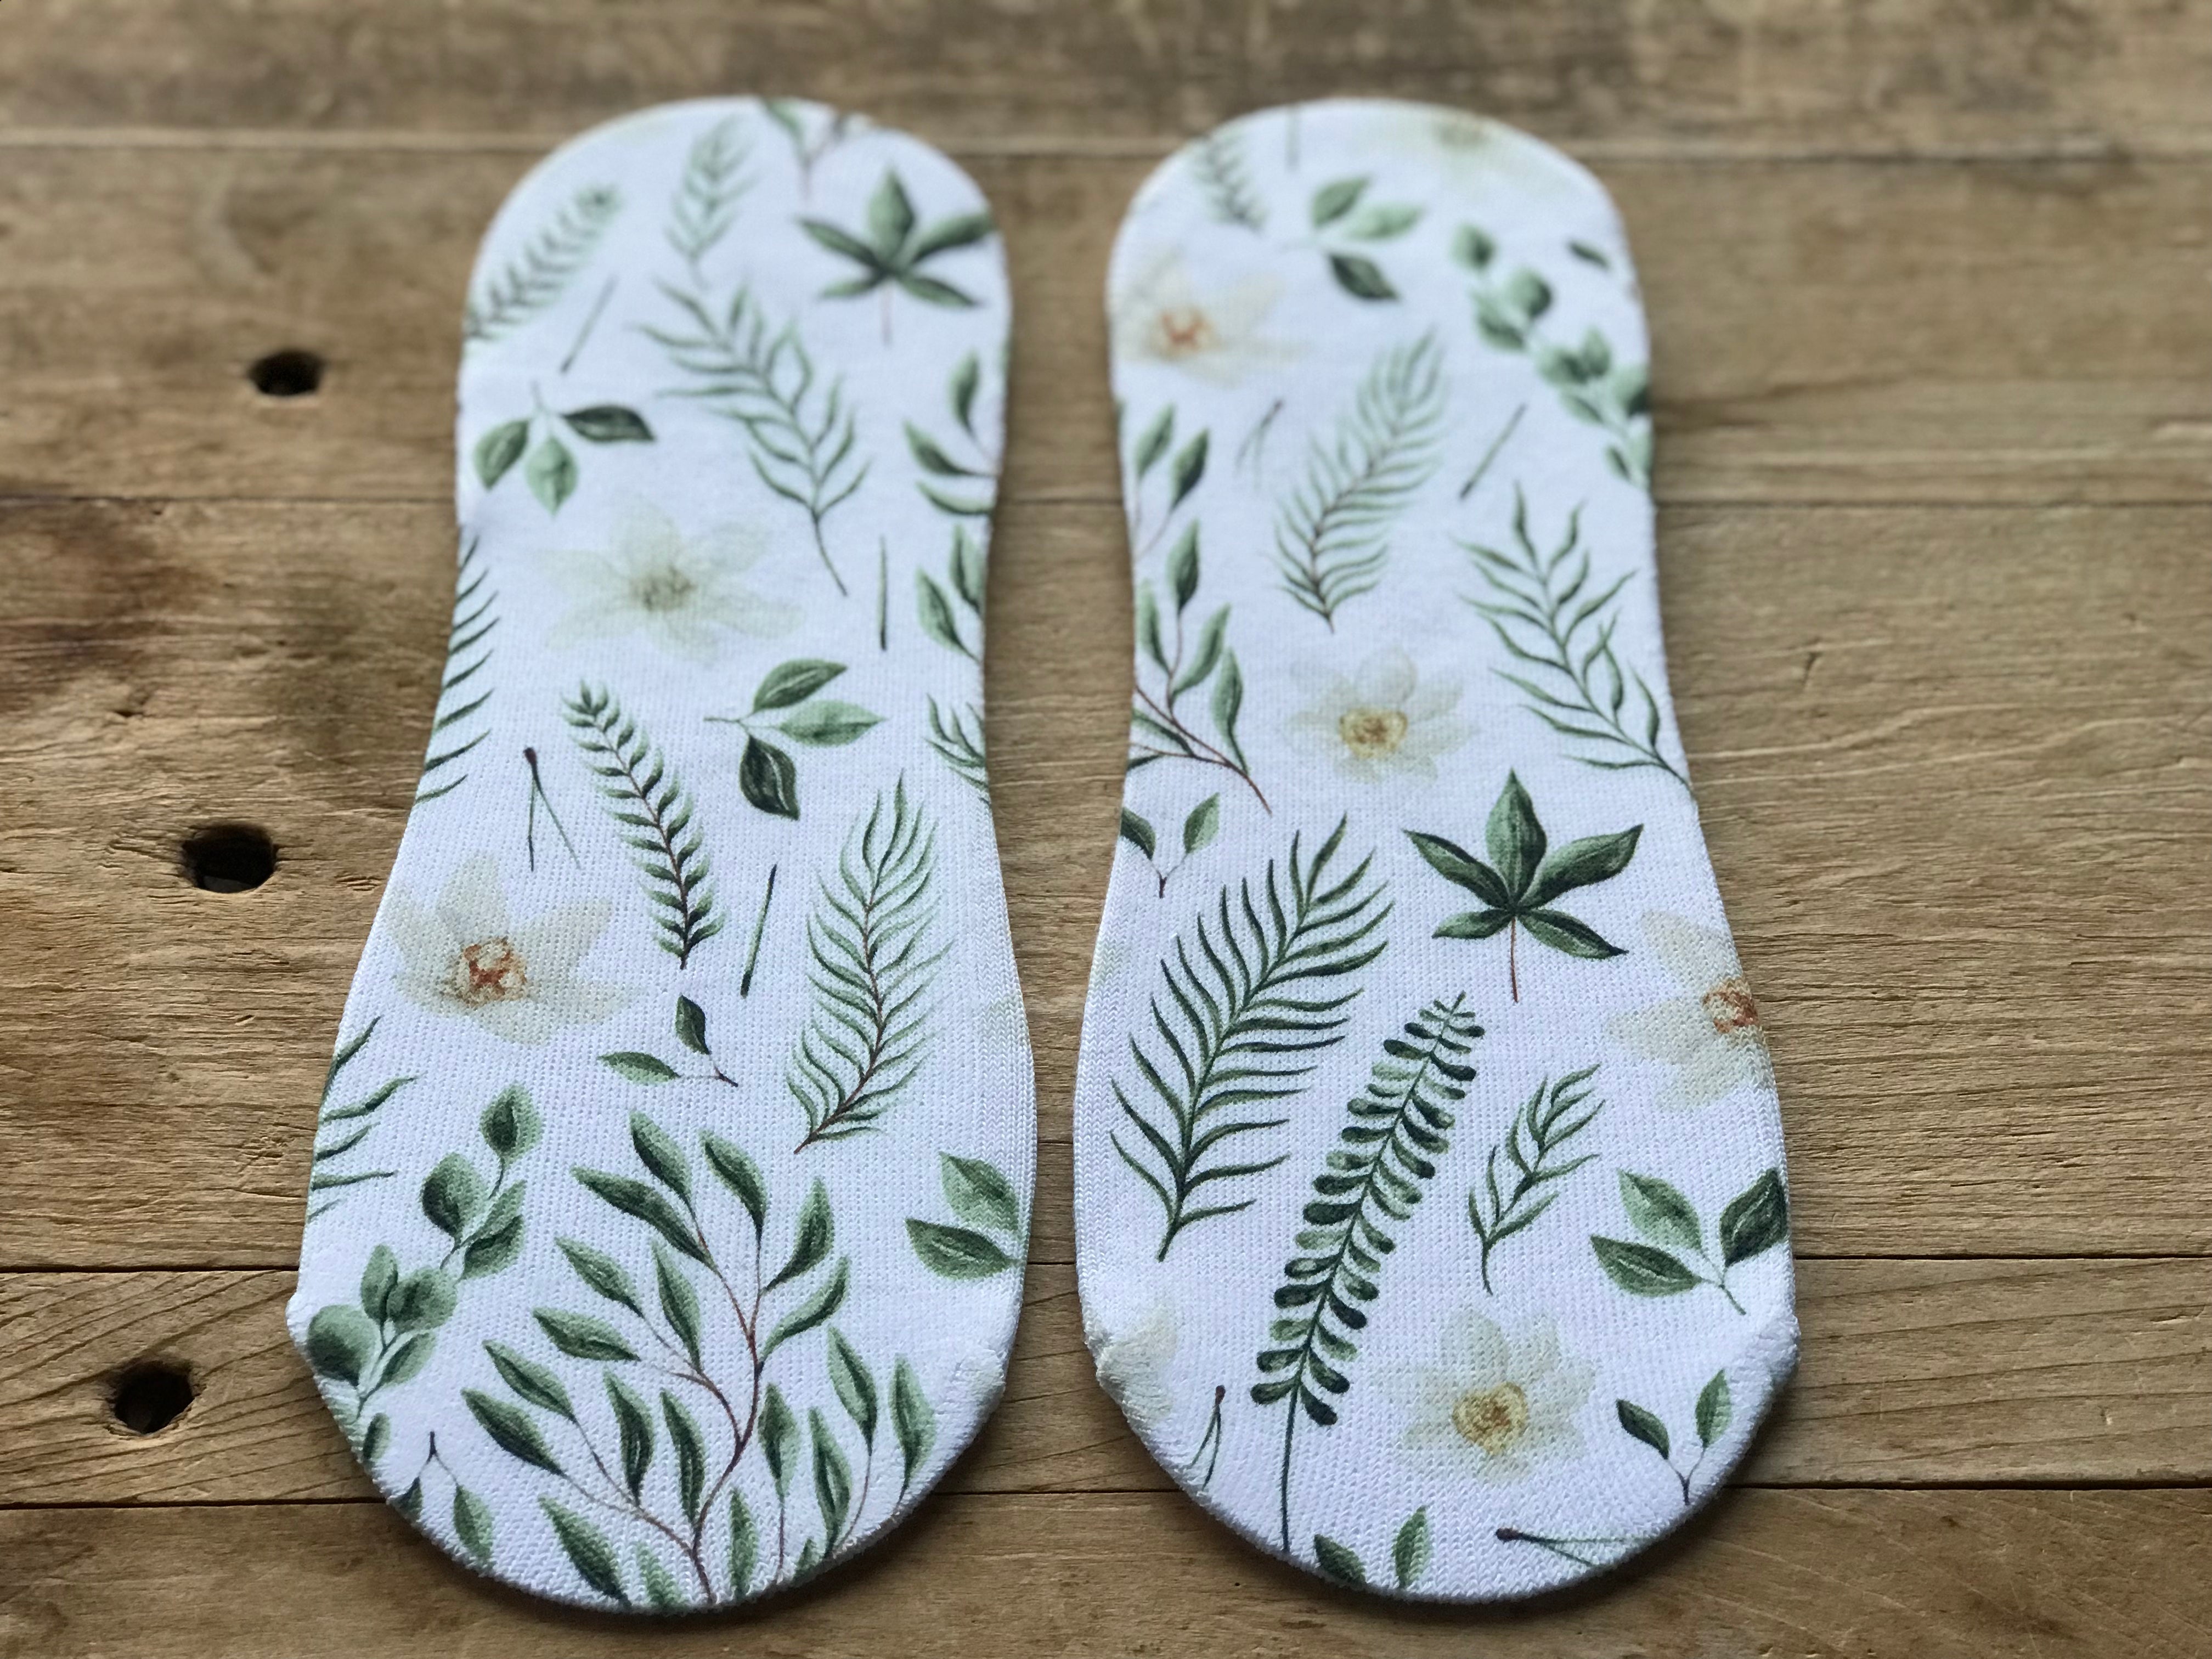 Evergreen State Est. 1893 His & Hers Socks